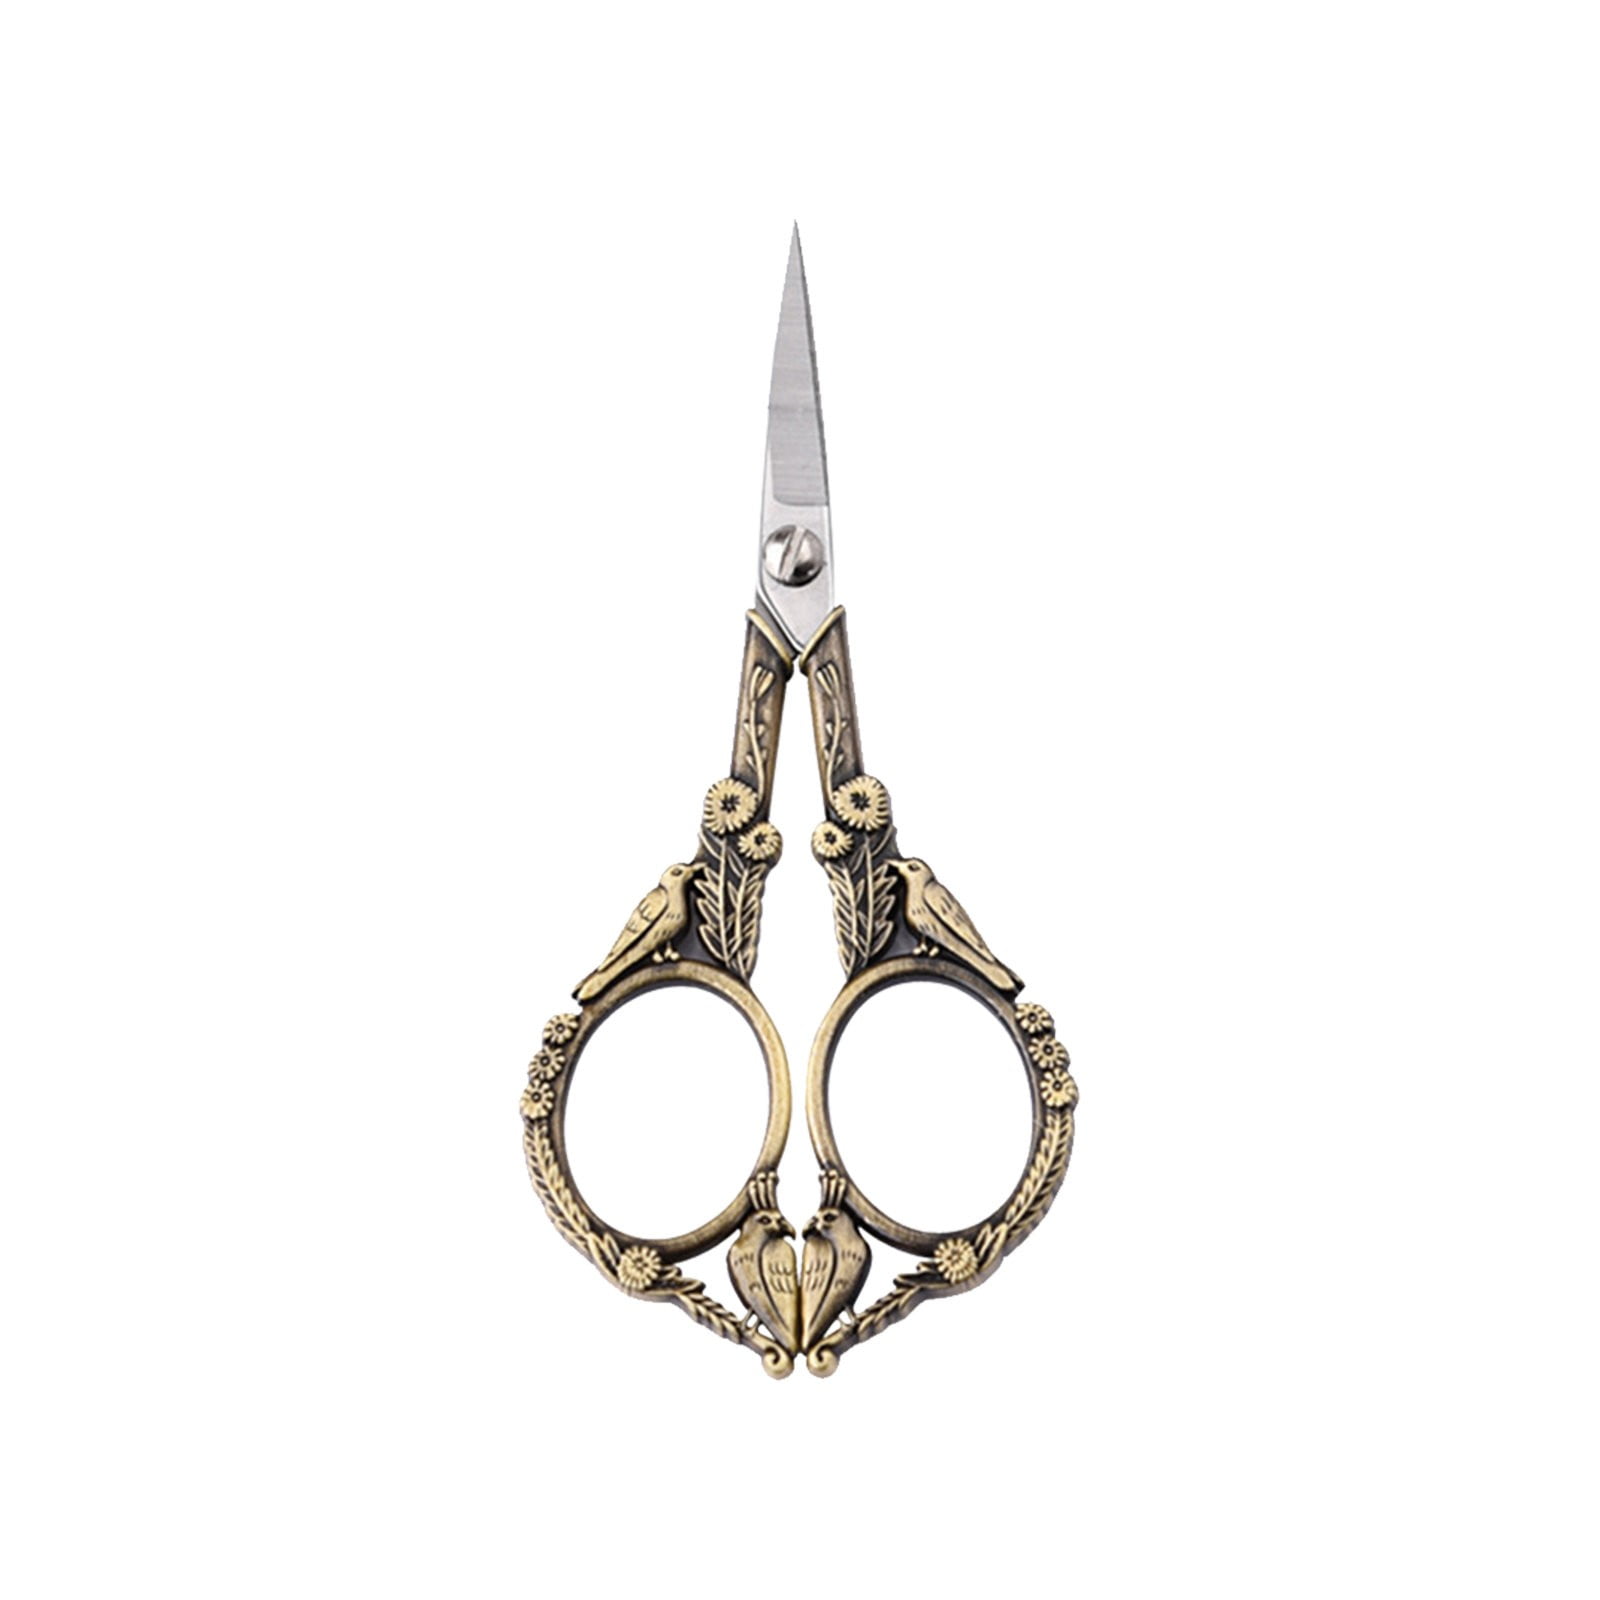  YOUGUOM Crochet Scissors Small Sharp Tip Sewing